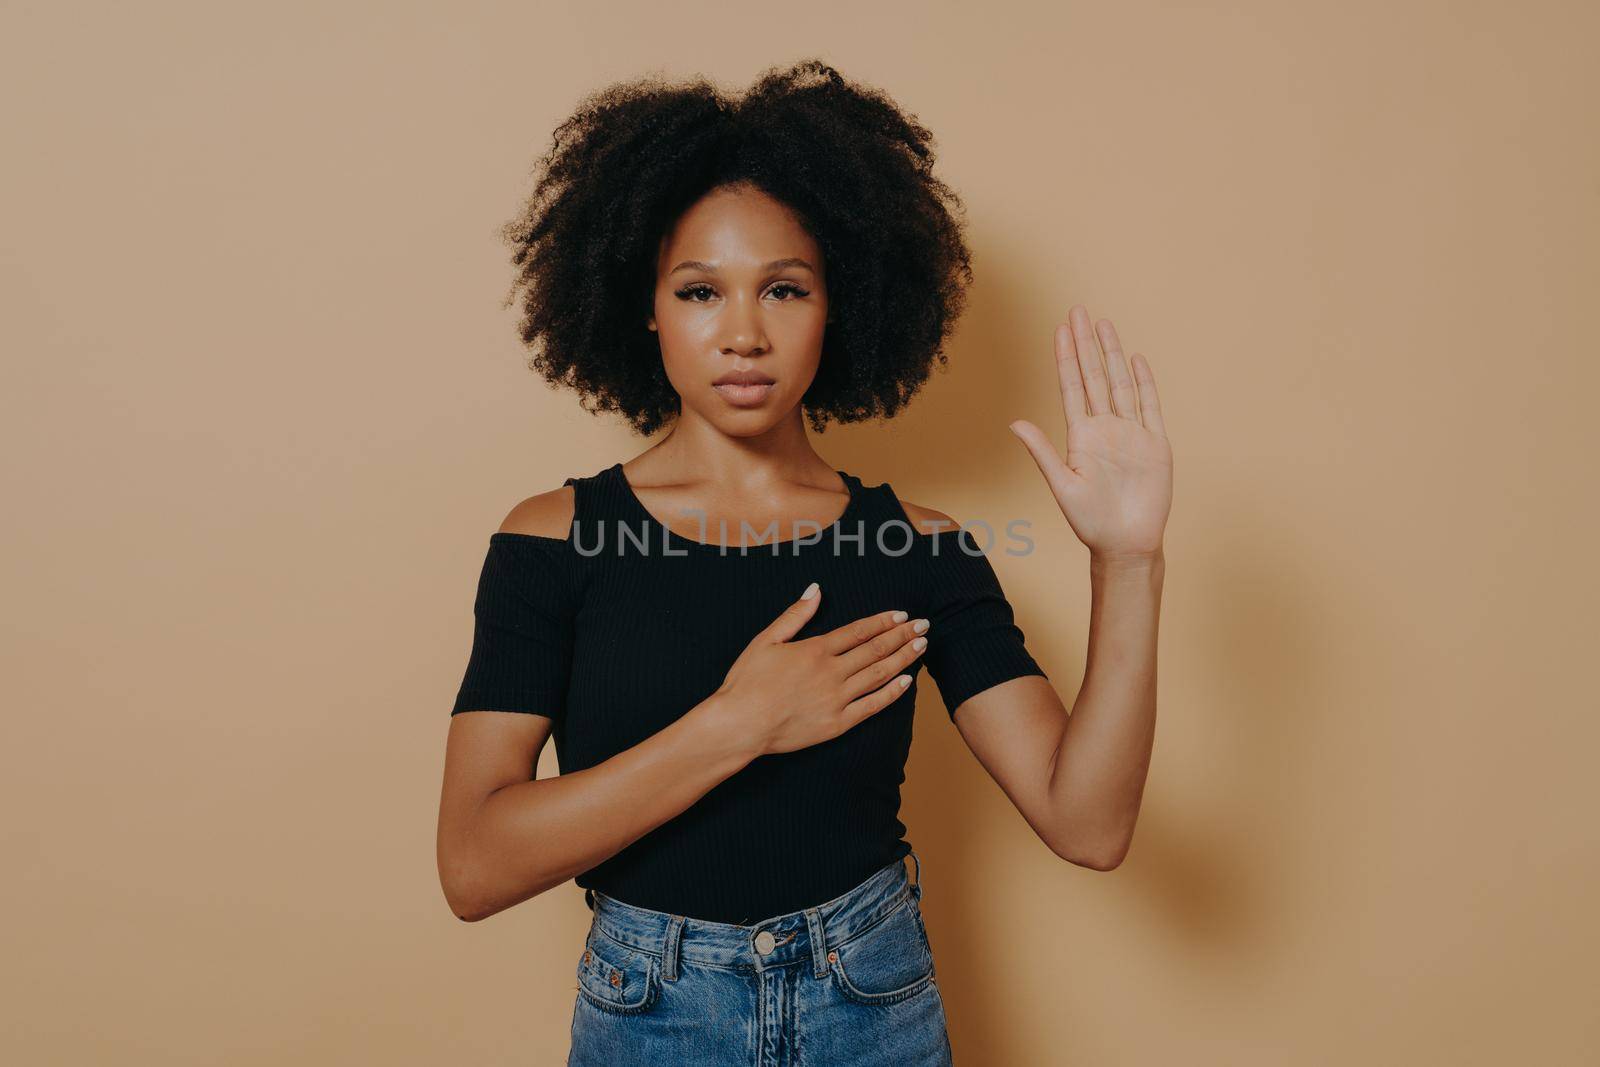 Dark skinned woman wearing casual shirt and jeans standing over isolated beige background, making swearing pose with hand on chest and fingers up, doing loyalty promise oath. Patriotism concept